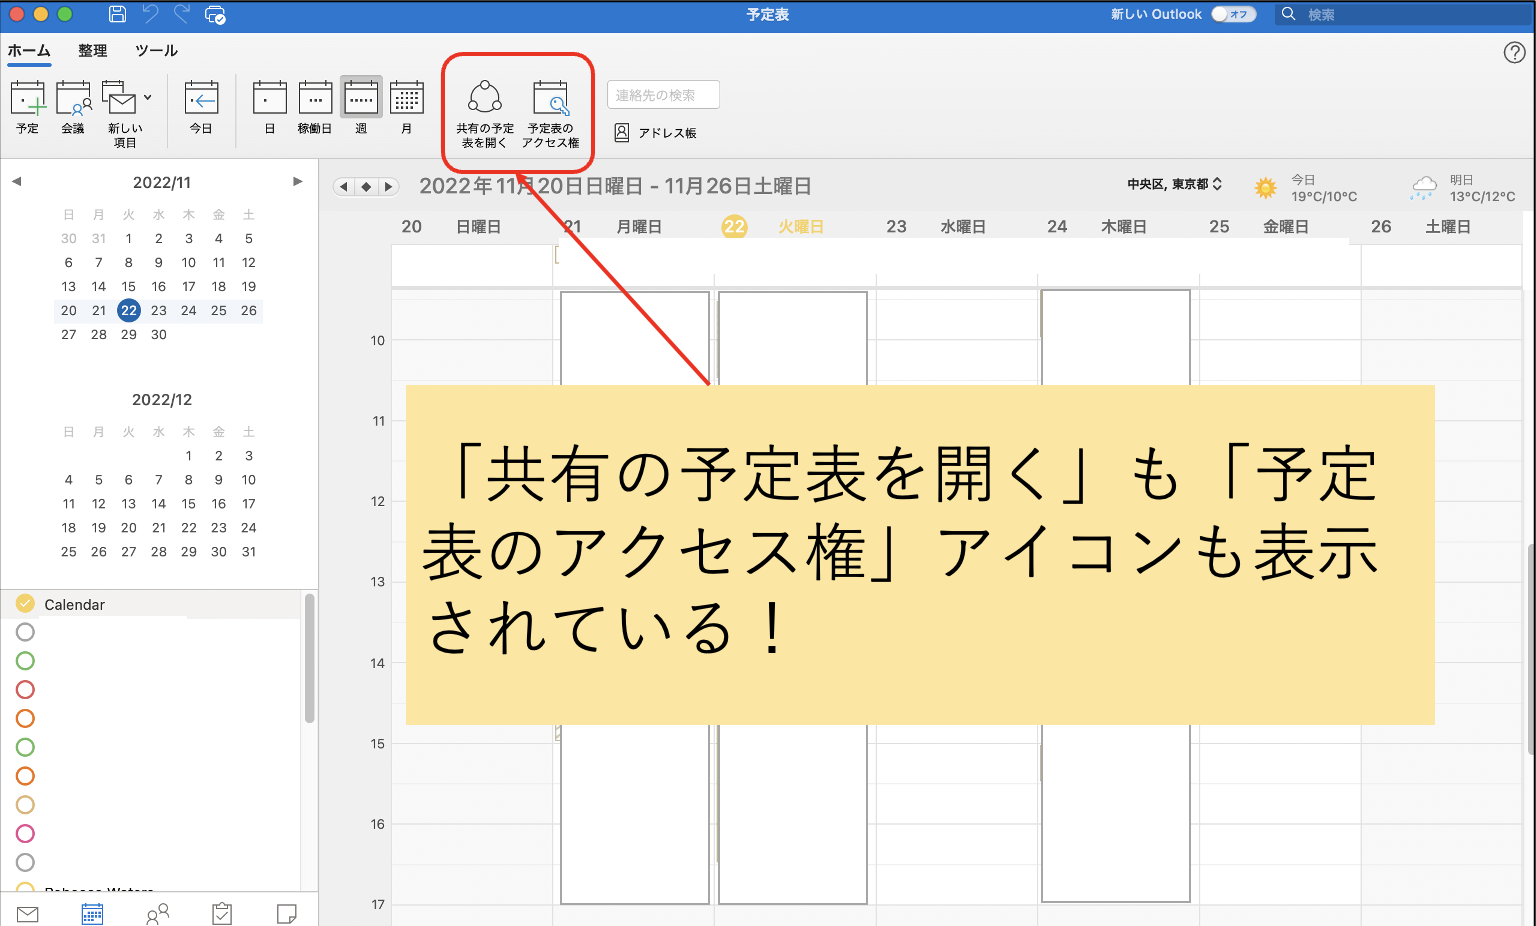 Outlook for Macの予定表（従来のOutlook）